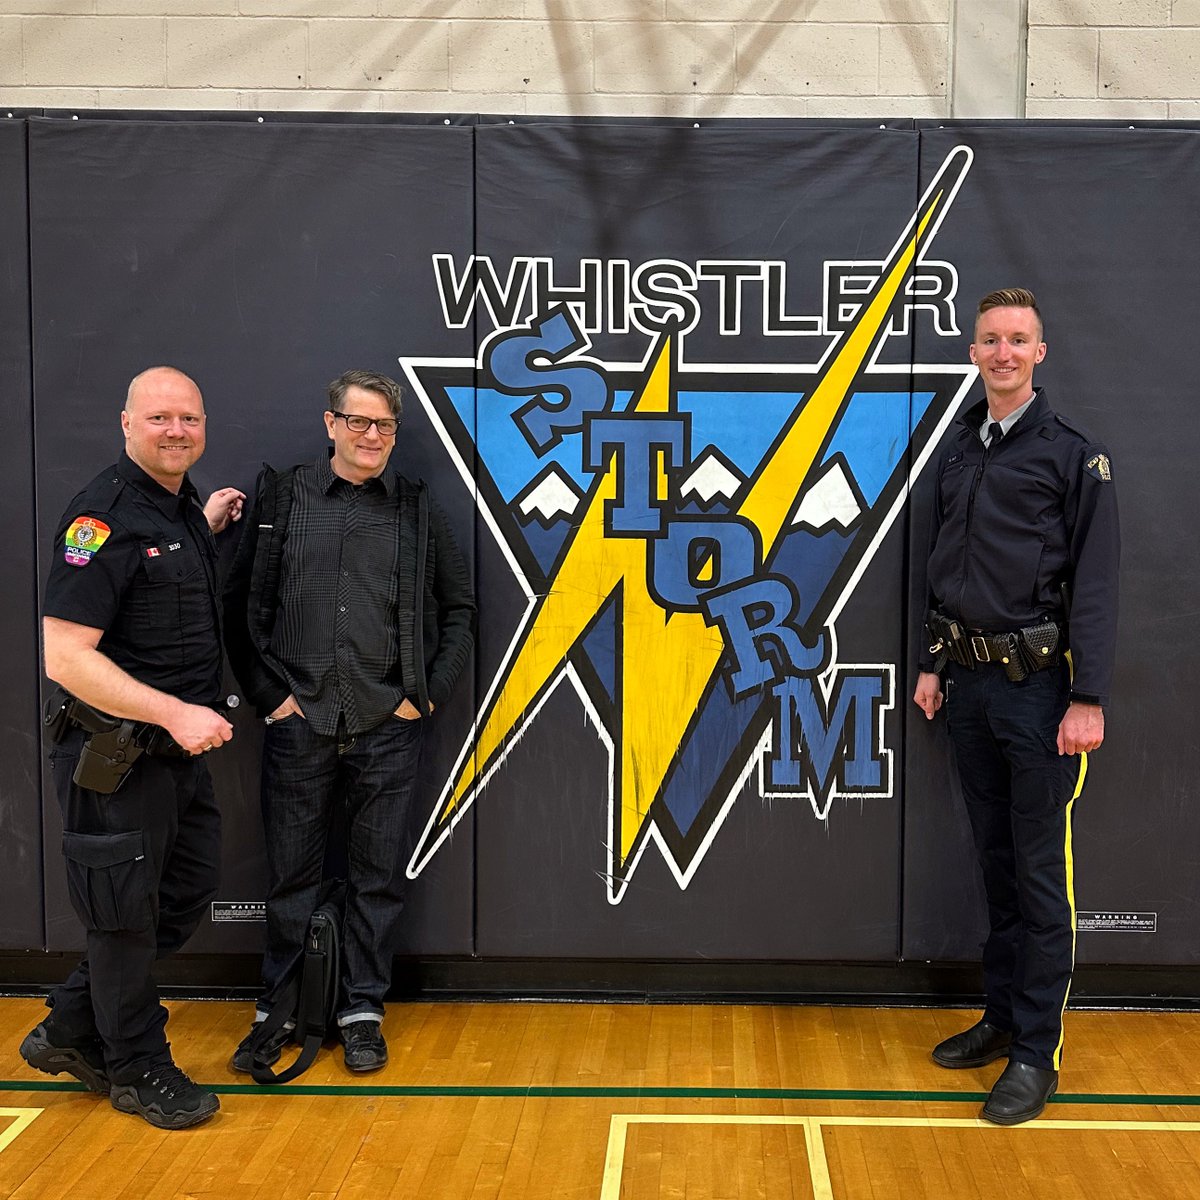 Thanks to #WhistlerSecondary for inviting us to present to your Law 11/12 class yesterday! Lots of great questions and the class was very engaged. It was also so nice to see a couple of familiar faces from the #WhistlerRainbowConnection meeting the night before! During our